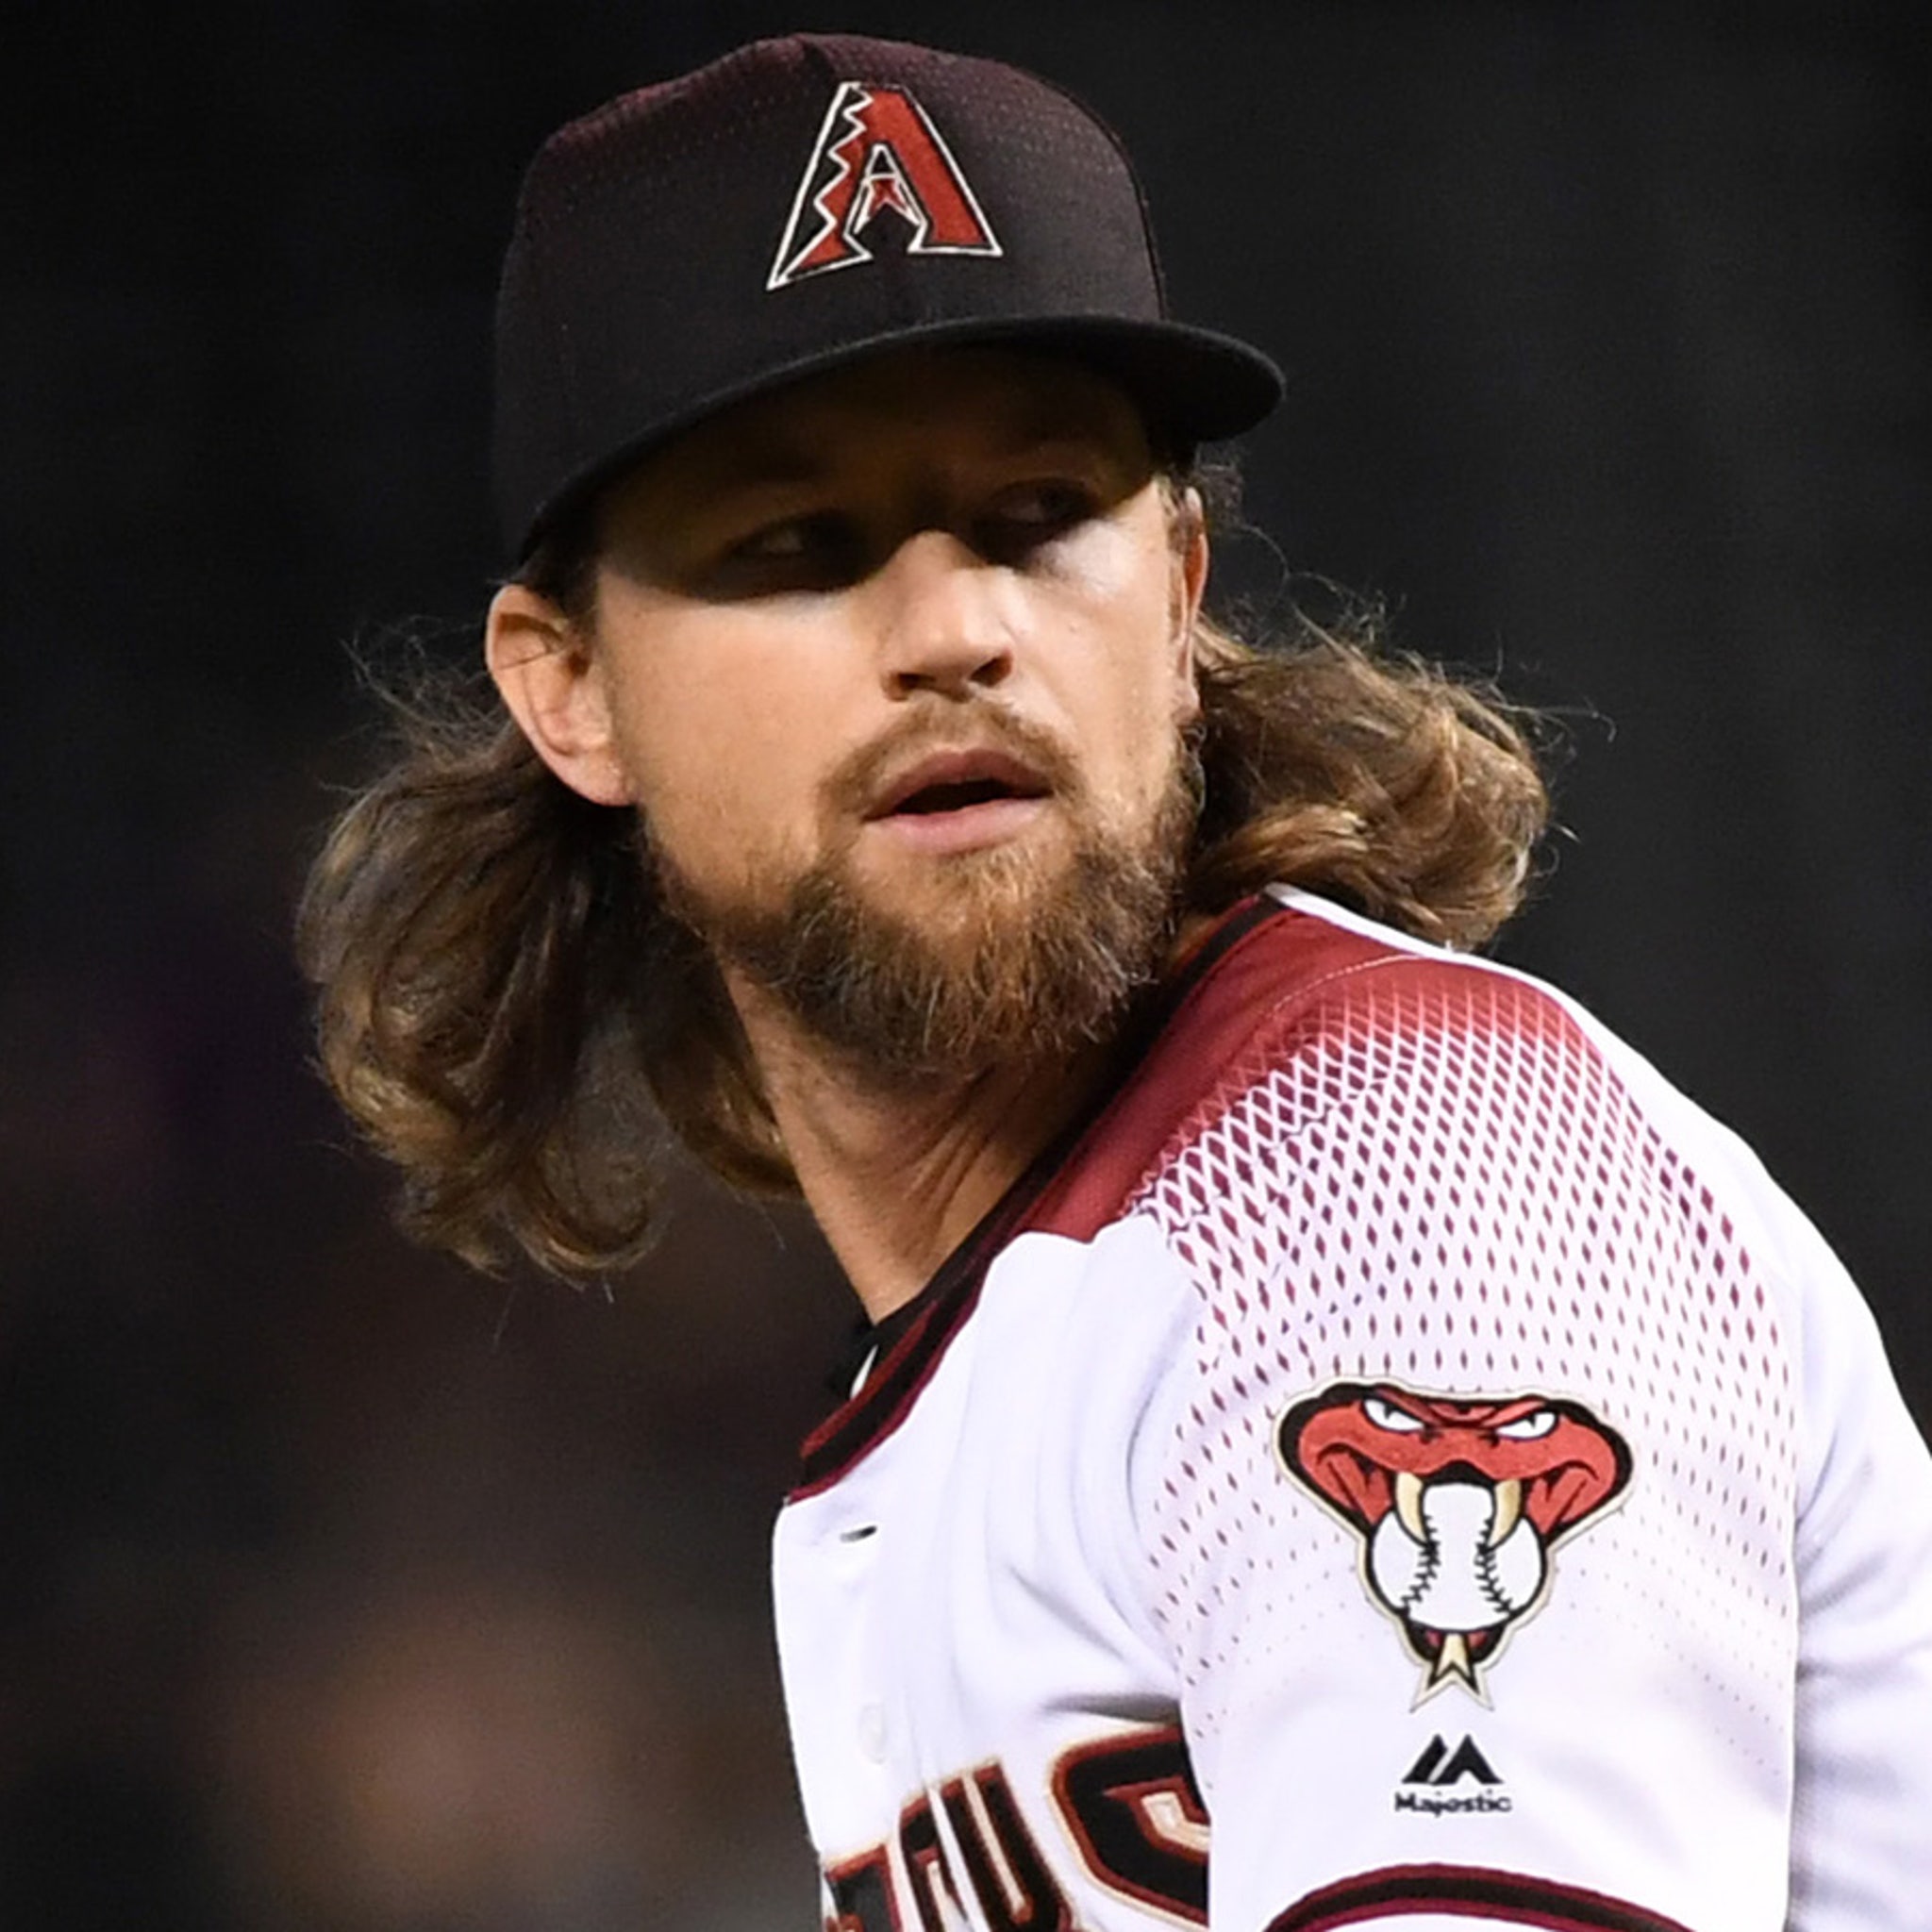 D-Backs' Mike Leake Opts Out Of MLB Restart, Nats' Ryan Zimmerman Too